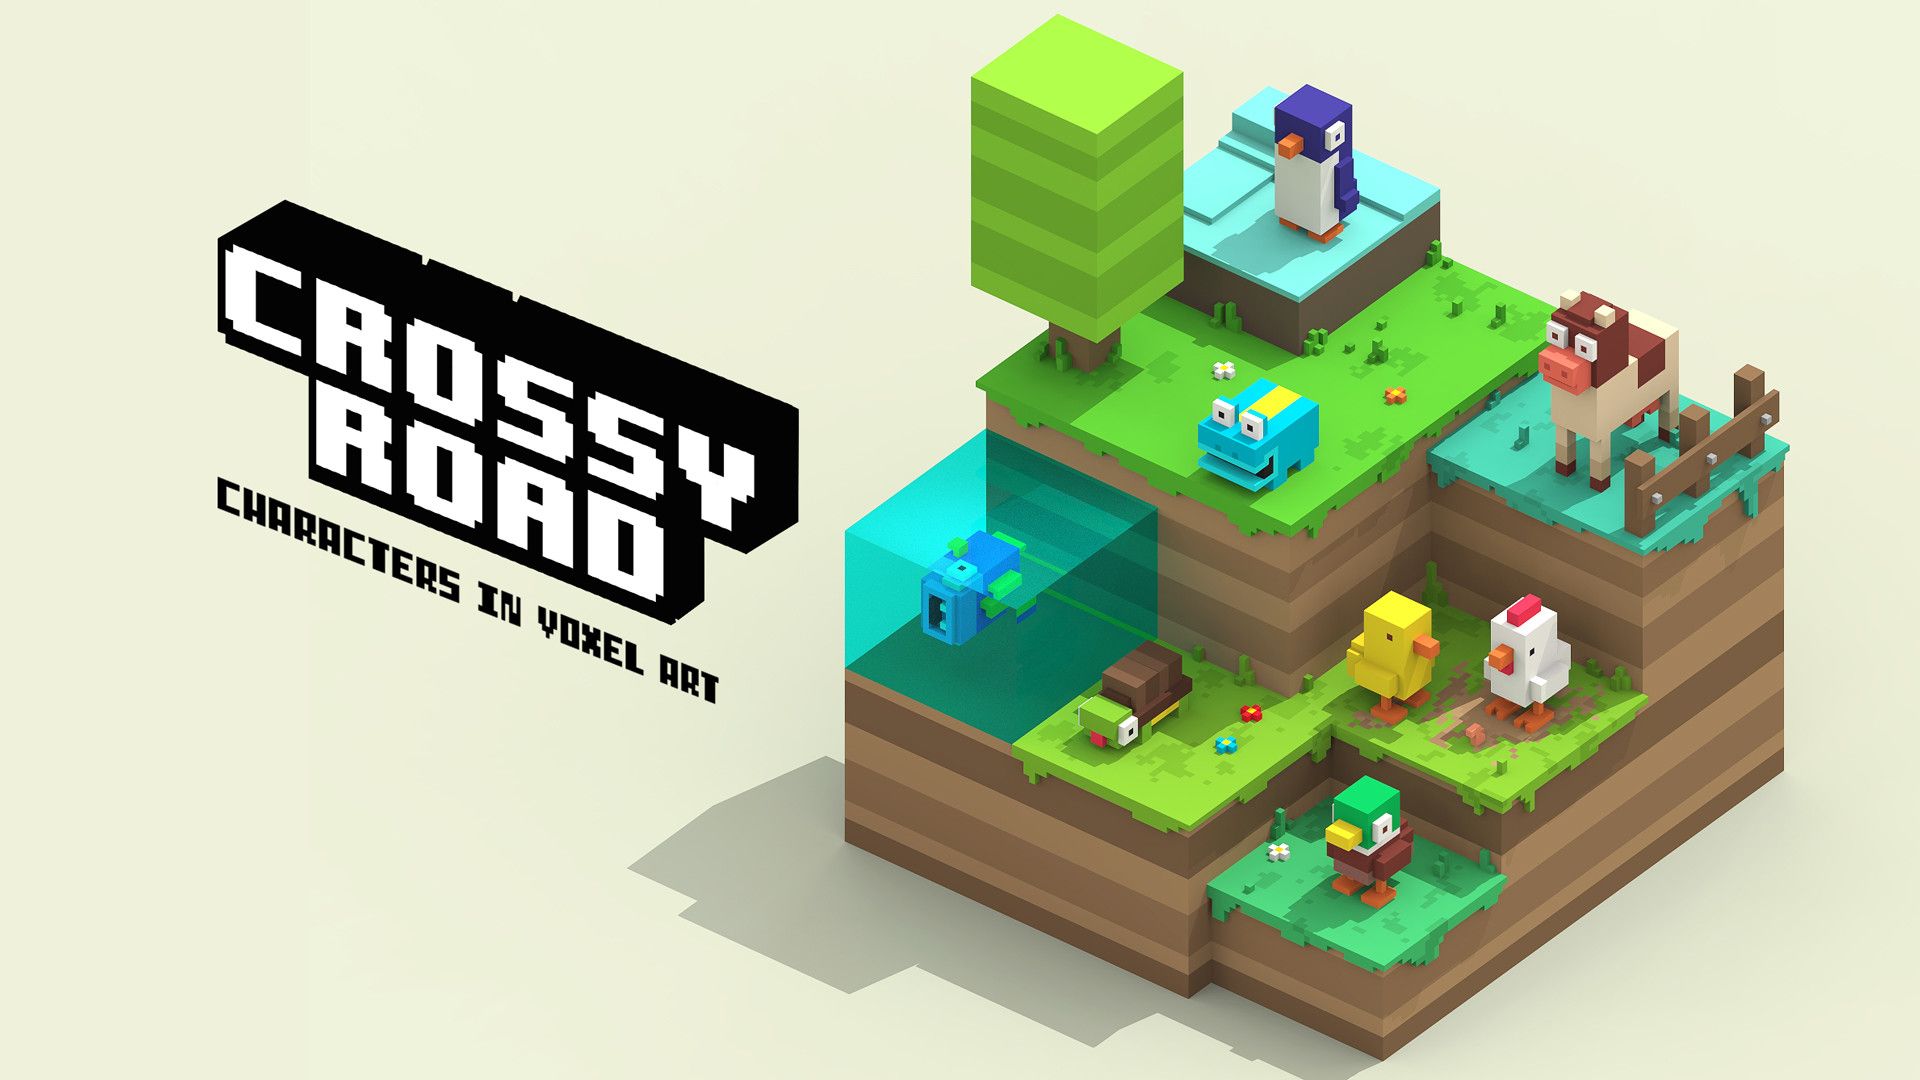 log onto crossy road with google account